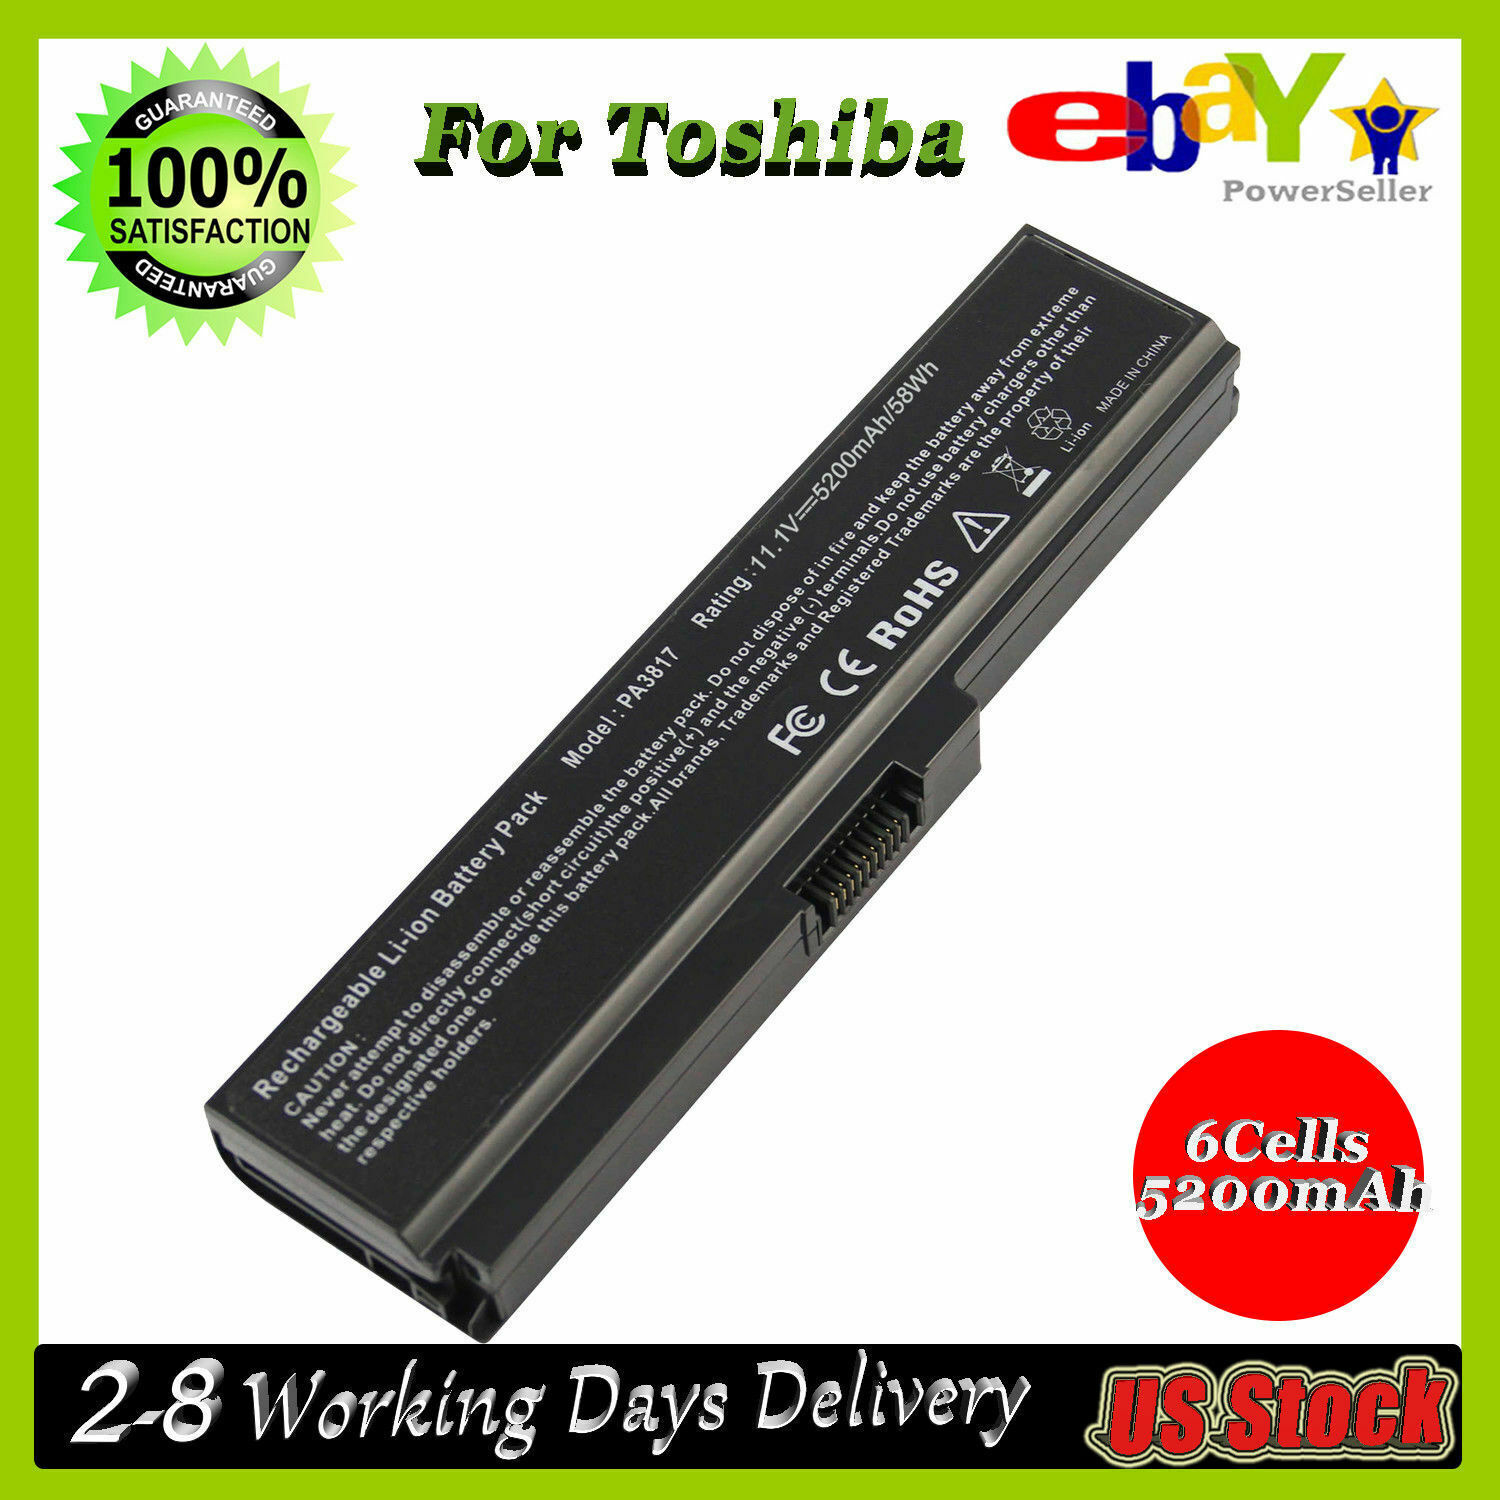 New For Toshiba PA3817U-1BRS Laptop Computer Battery Pack